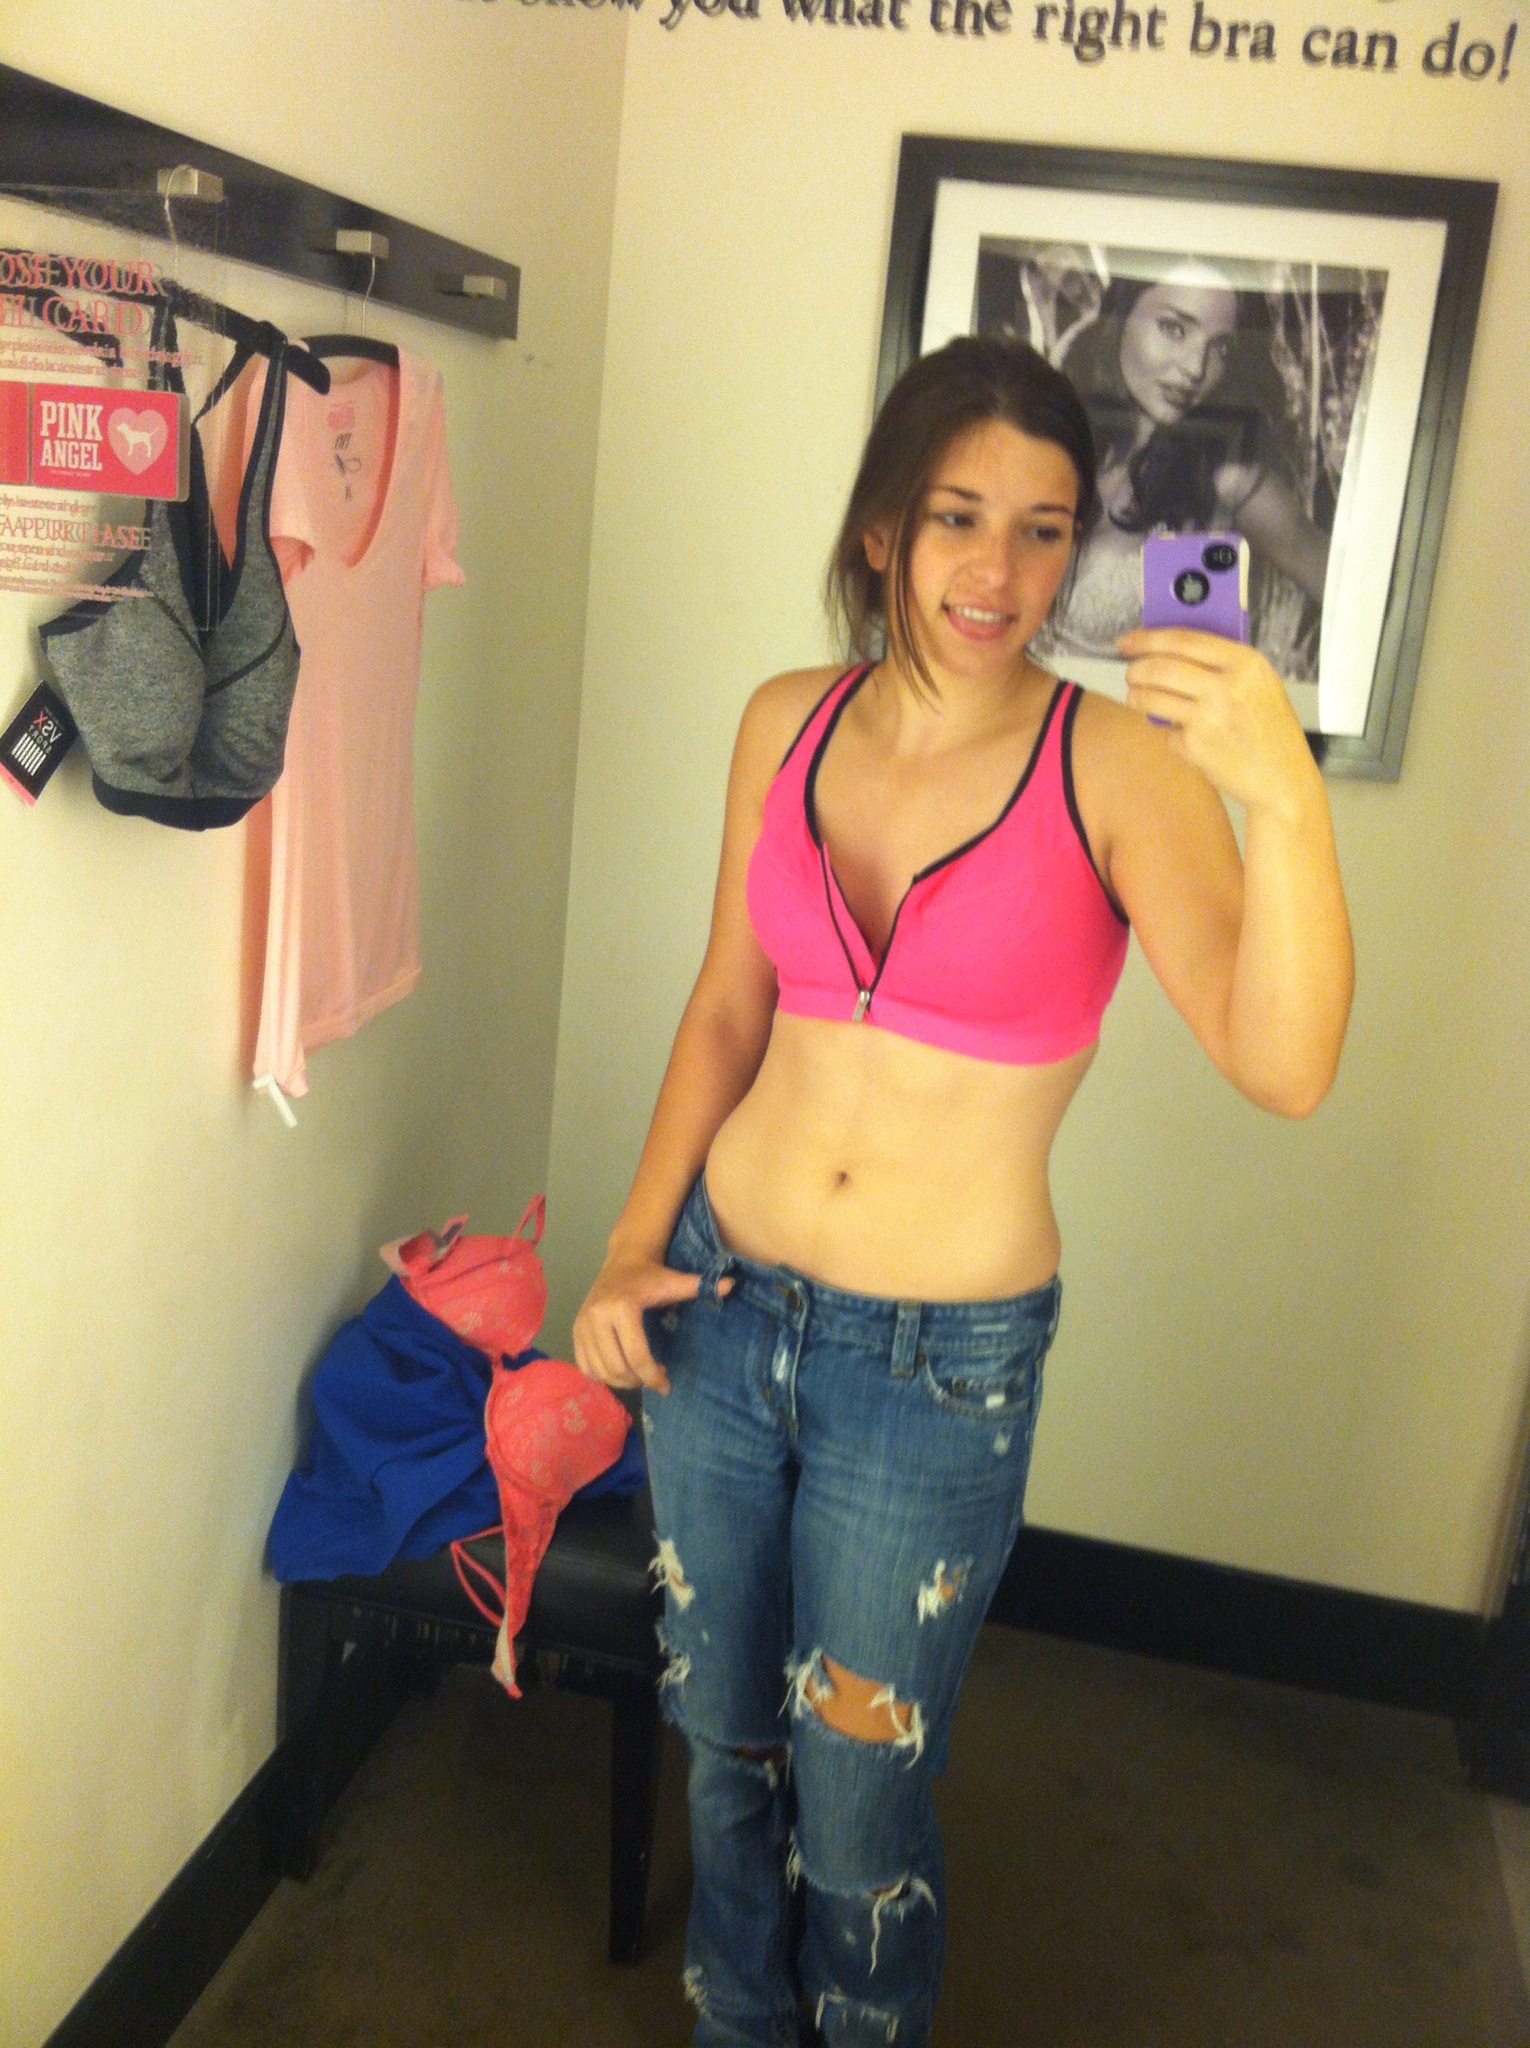 Confidence in a Victoria's Secret fitting room